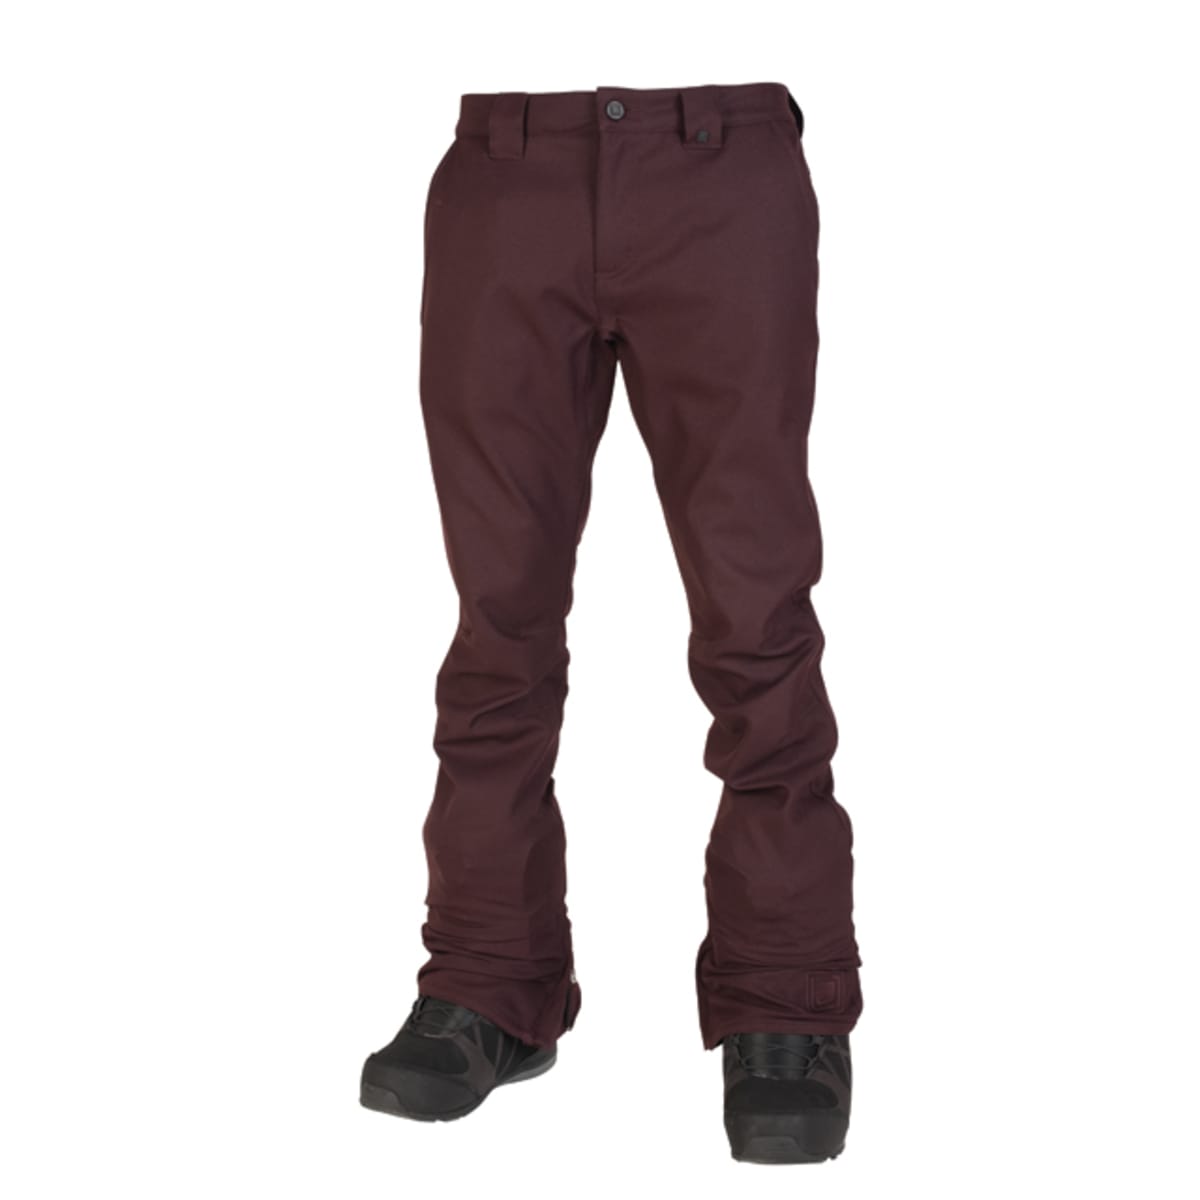 Gear of the Day: L1 Thunder Pant - Snowboarder